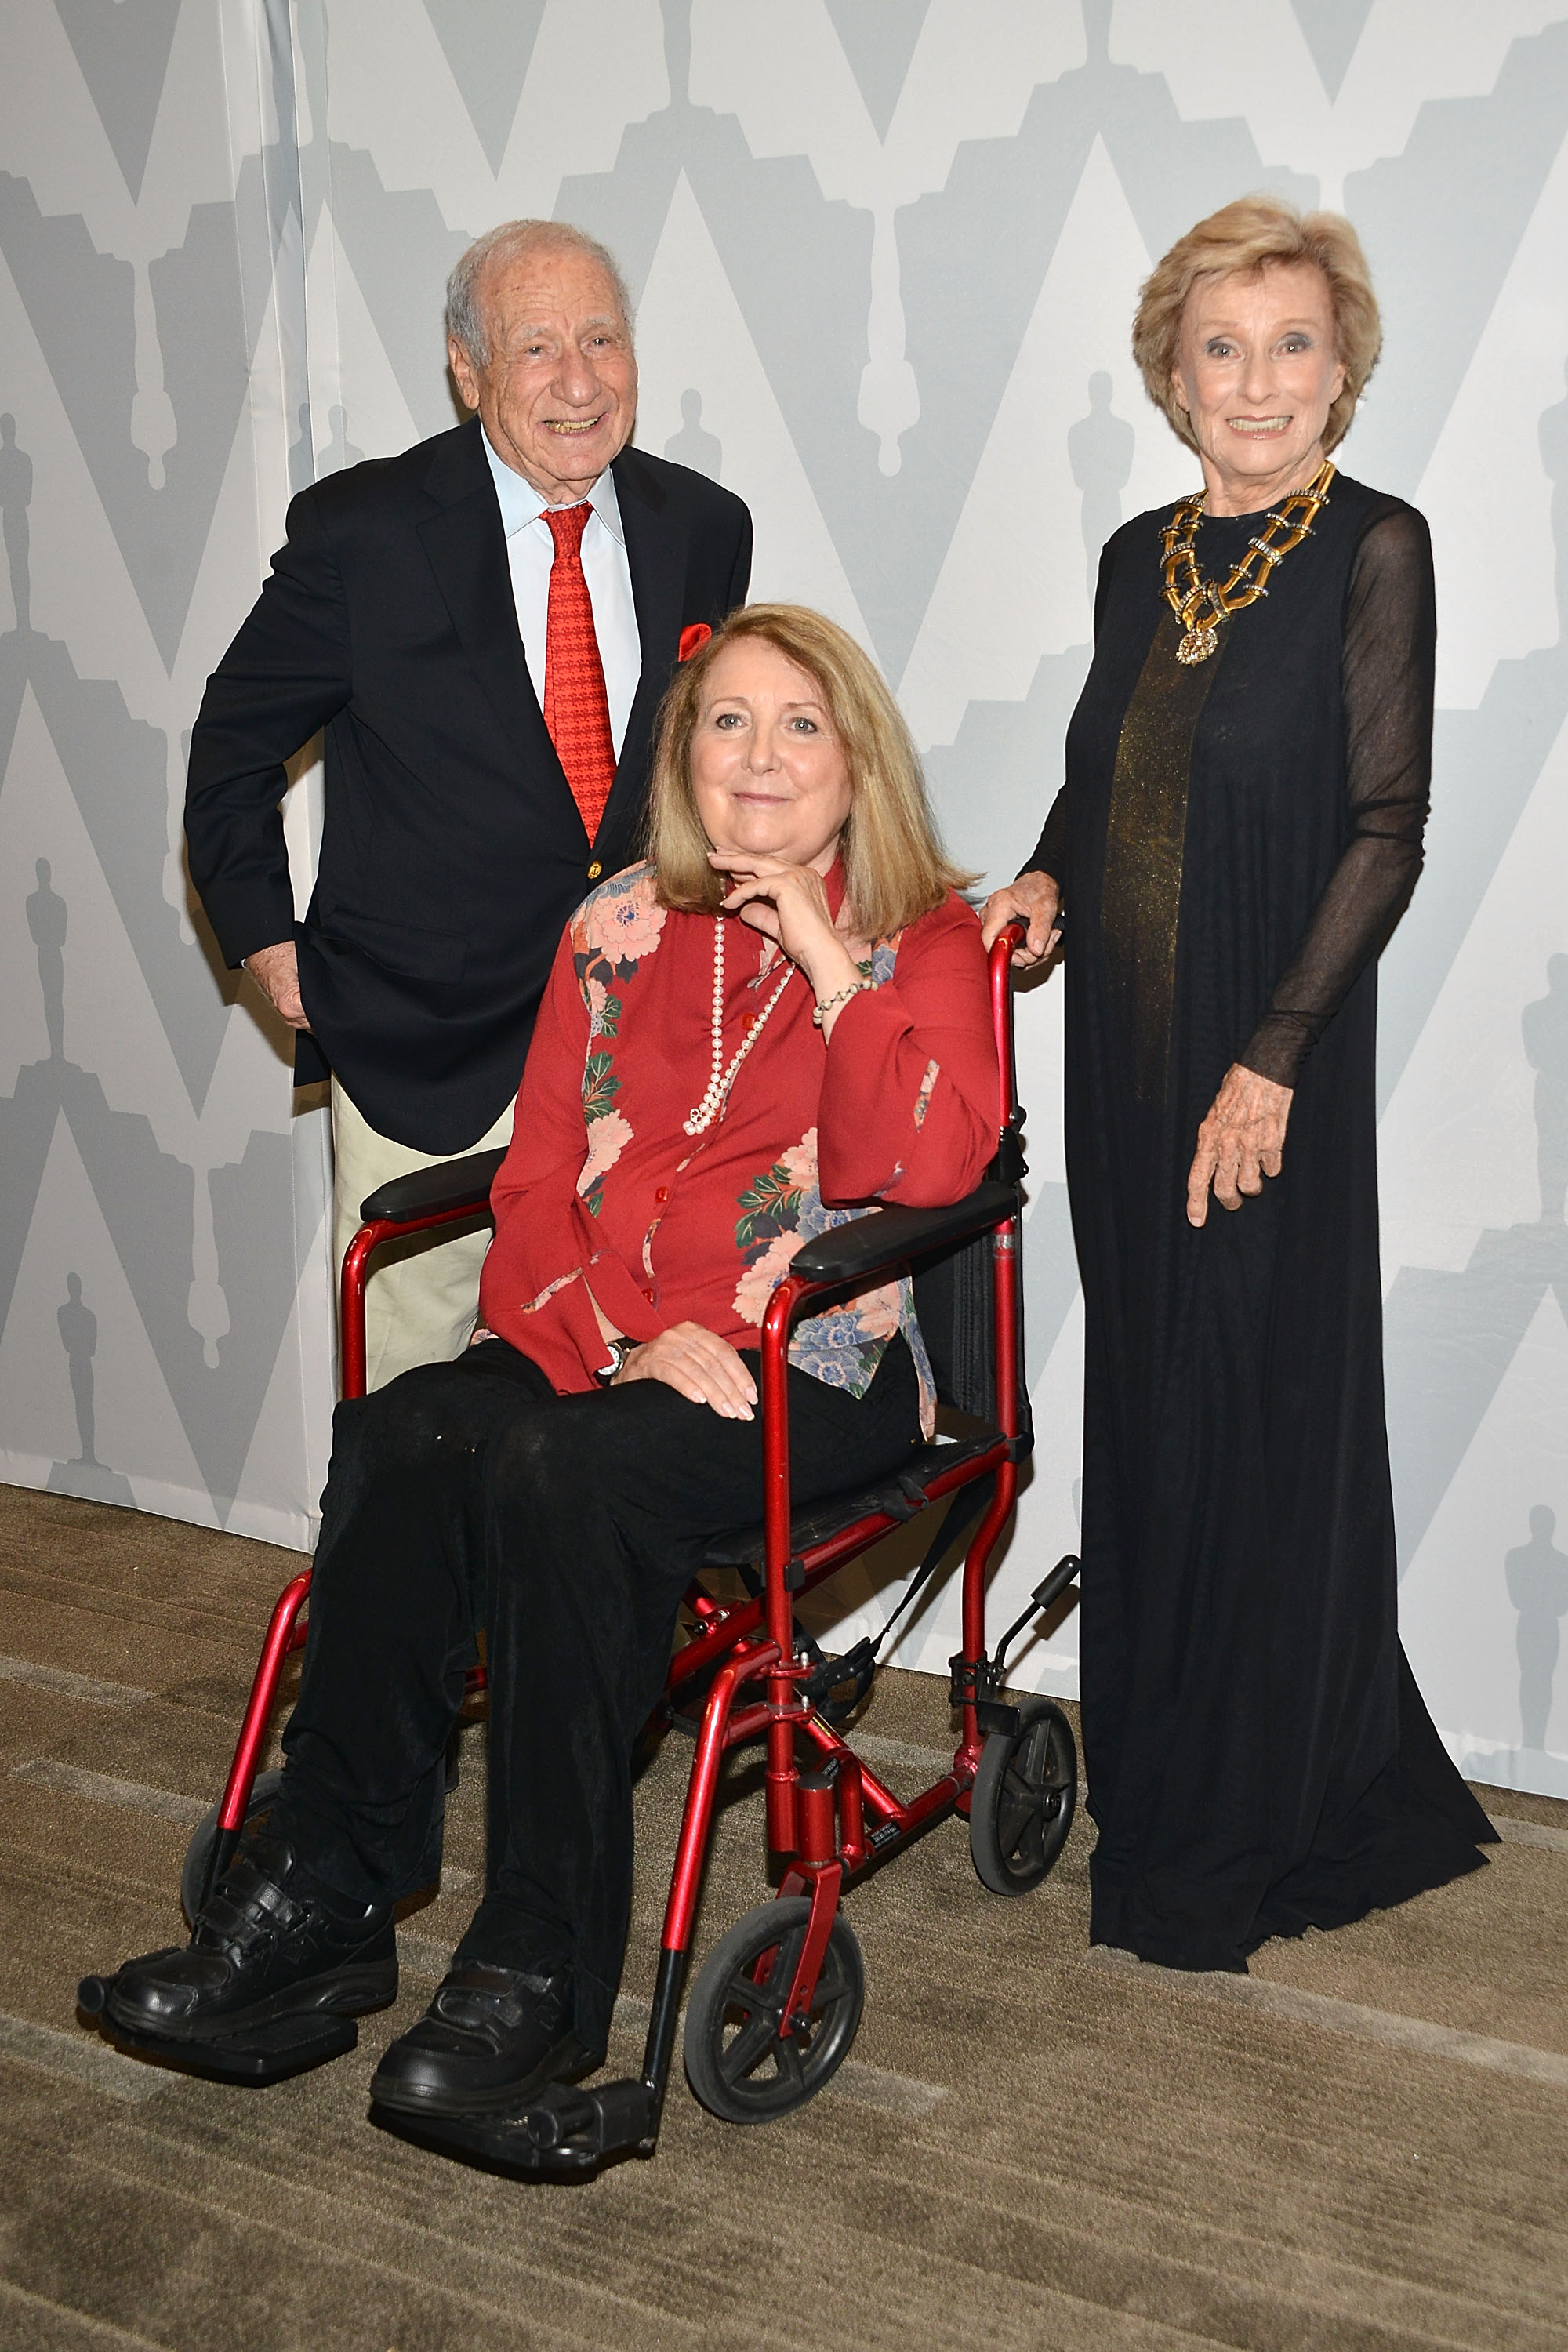 Mel Brooks, Teri Garr, and Cloris Leachman attend The Academy of Motion Picture Arts and Sciences to celebrate the 40th anniversary of "Young Frankenstein" at AMPAS Samuel Goldwyn Theater in Beverly Hills, California, on September 9, 2014. | Source: Getty Images